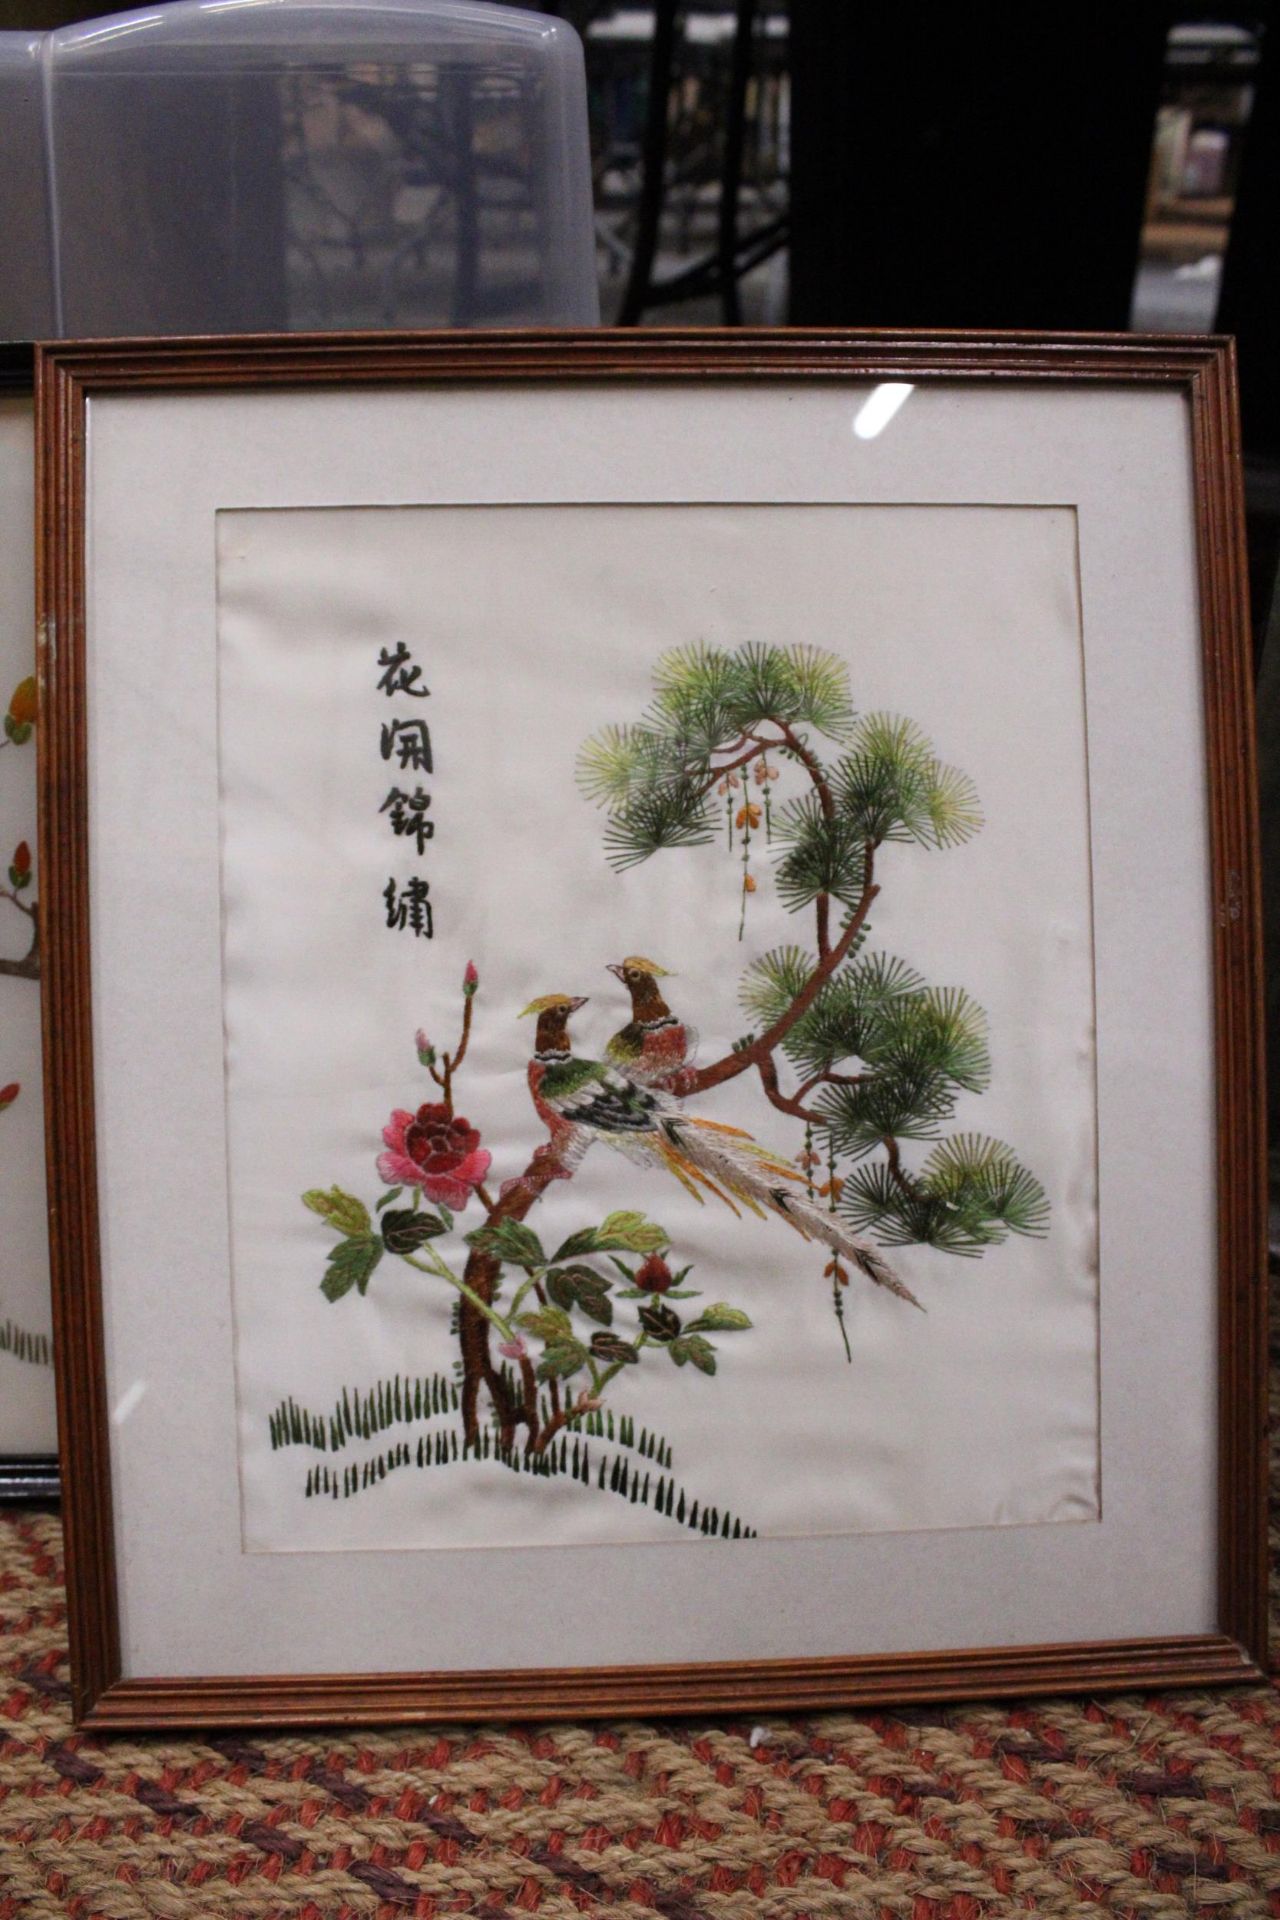 THREE VINTAGE ORIENTAL DEPICTING BIRDS HAND EMBROIDERED SILKS IN FRAMES - Image 3 of 4